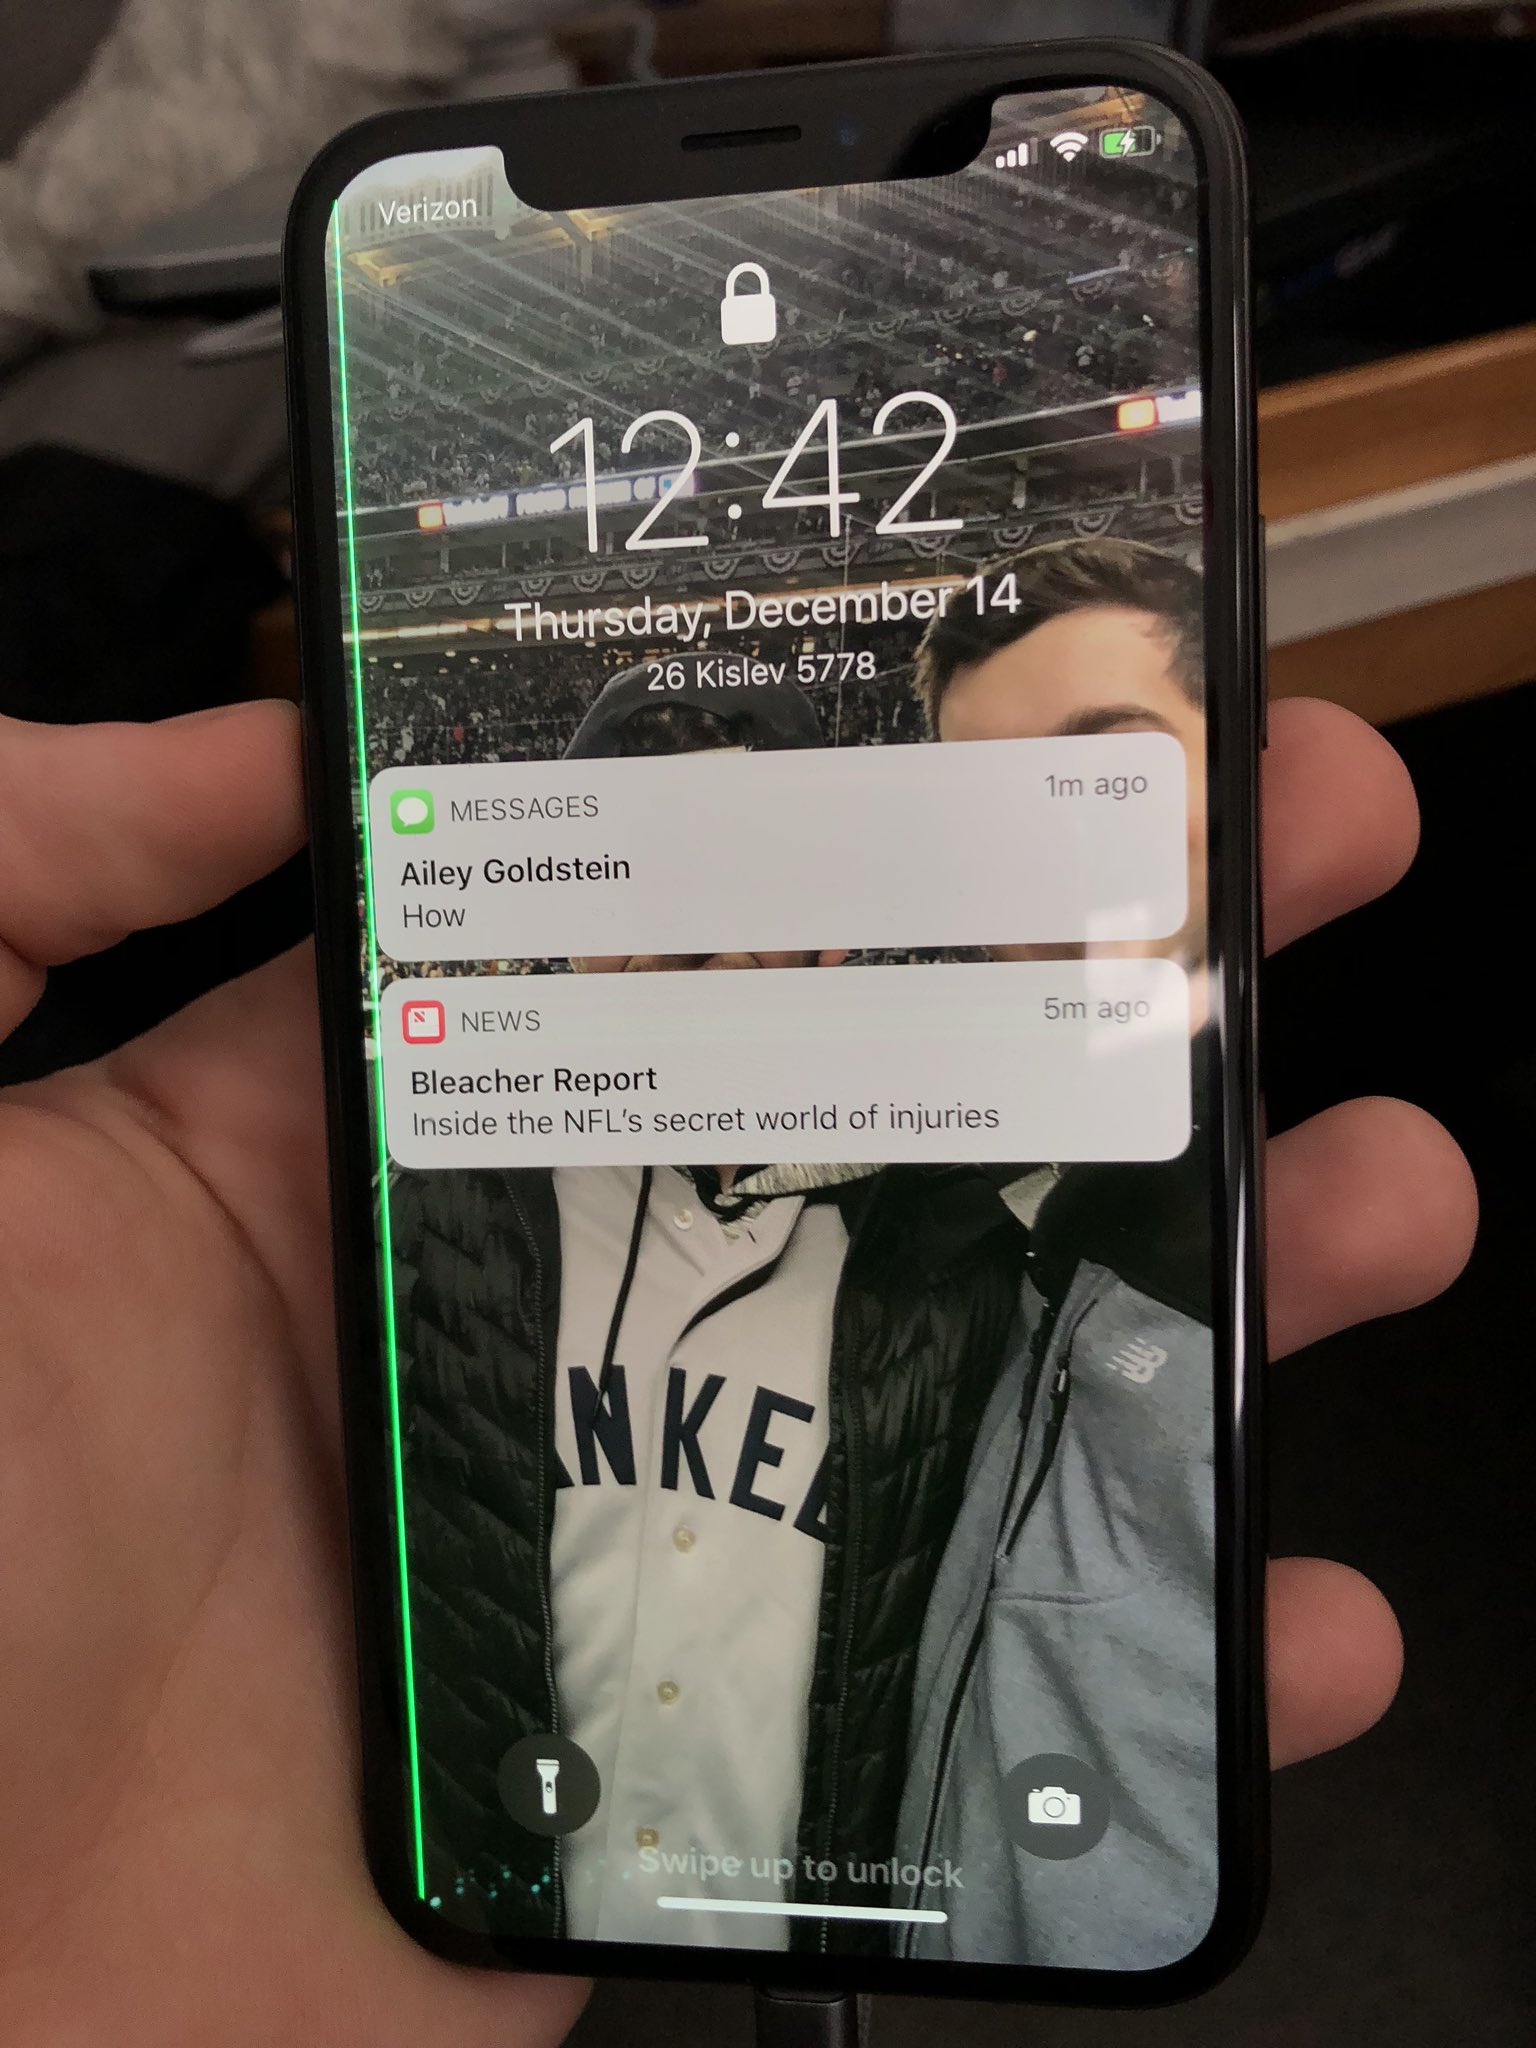 Austin Applesupport Just Got The Iphone X How Do I Fix This Issue Of The Green Line On The Left Side Of My Screen T Co Oxscn2ykec Twitter